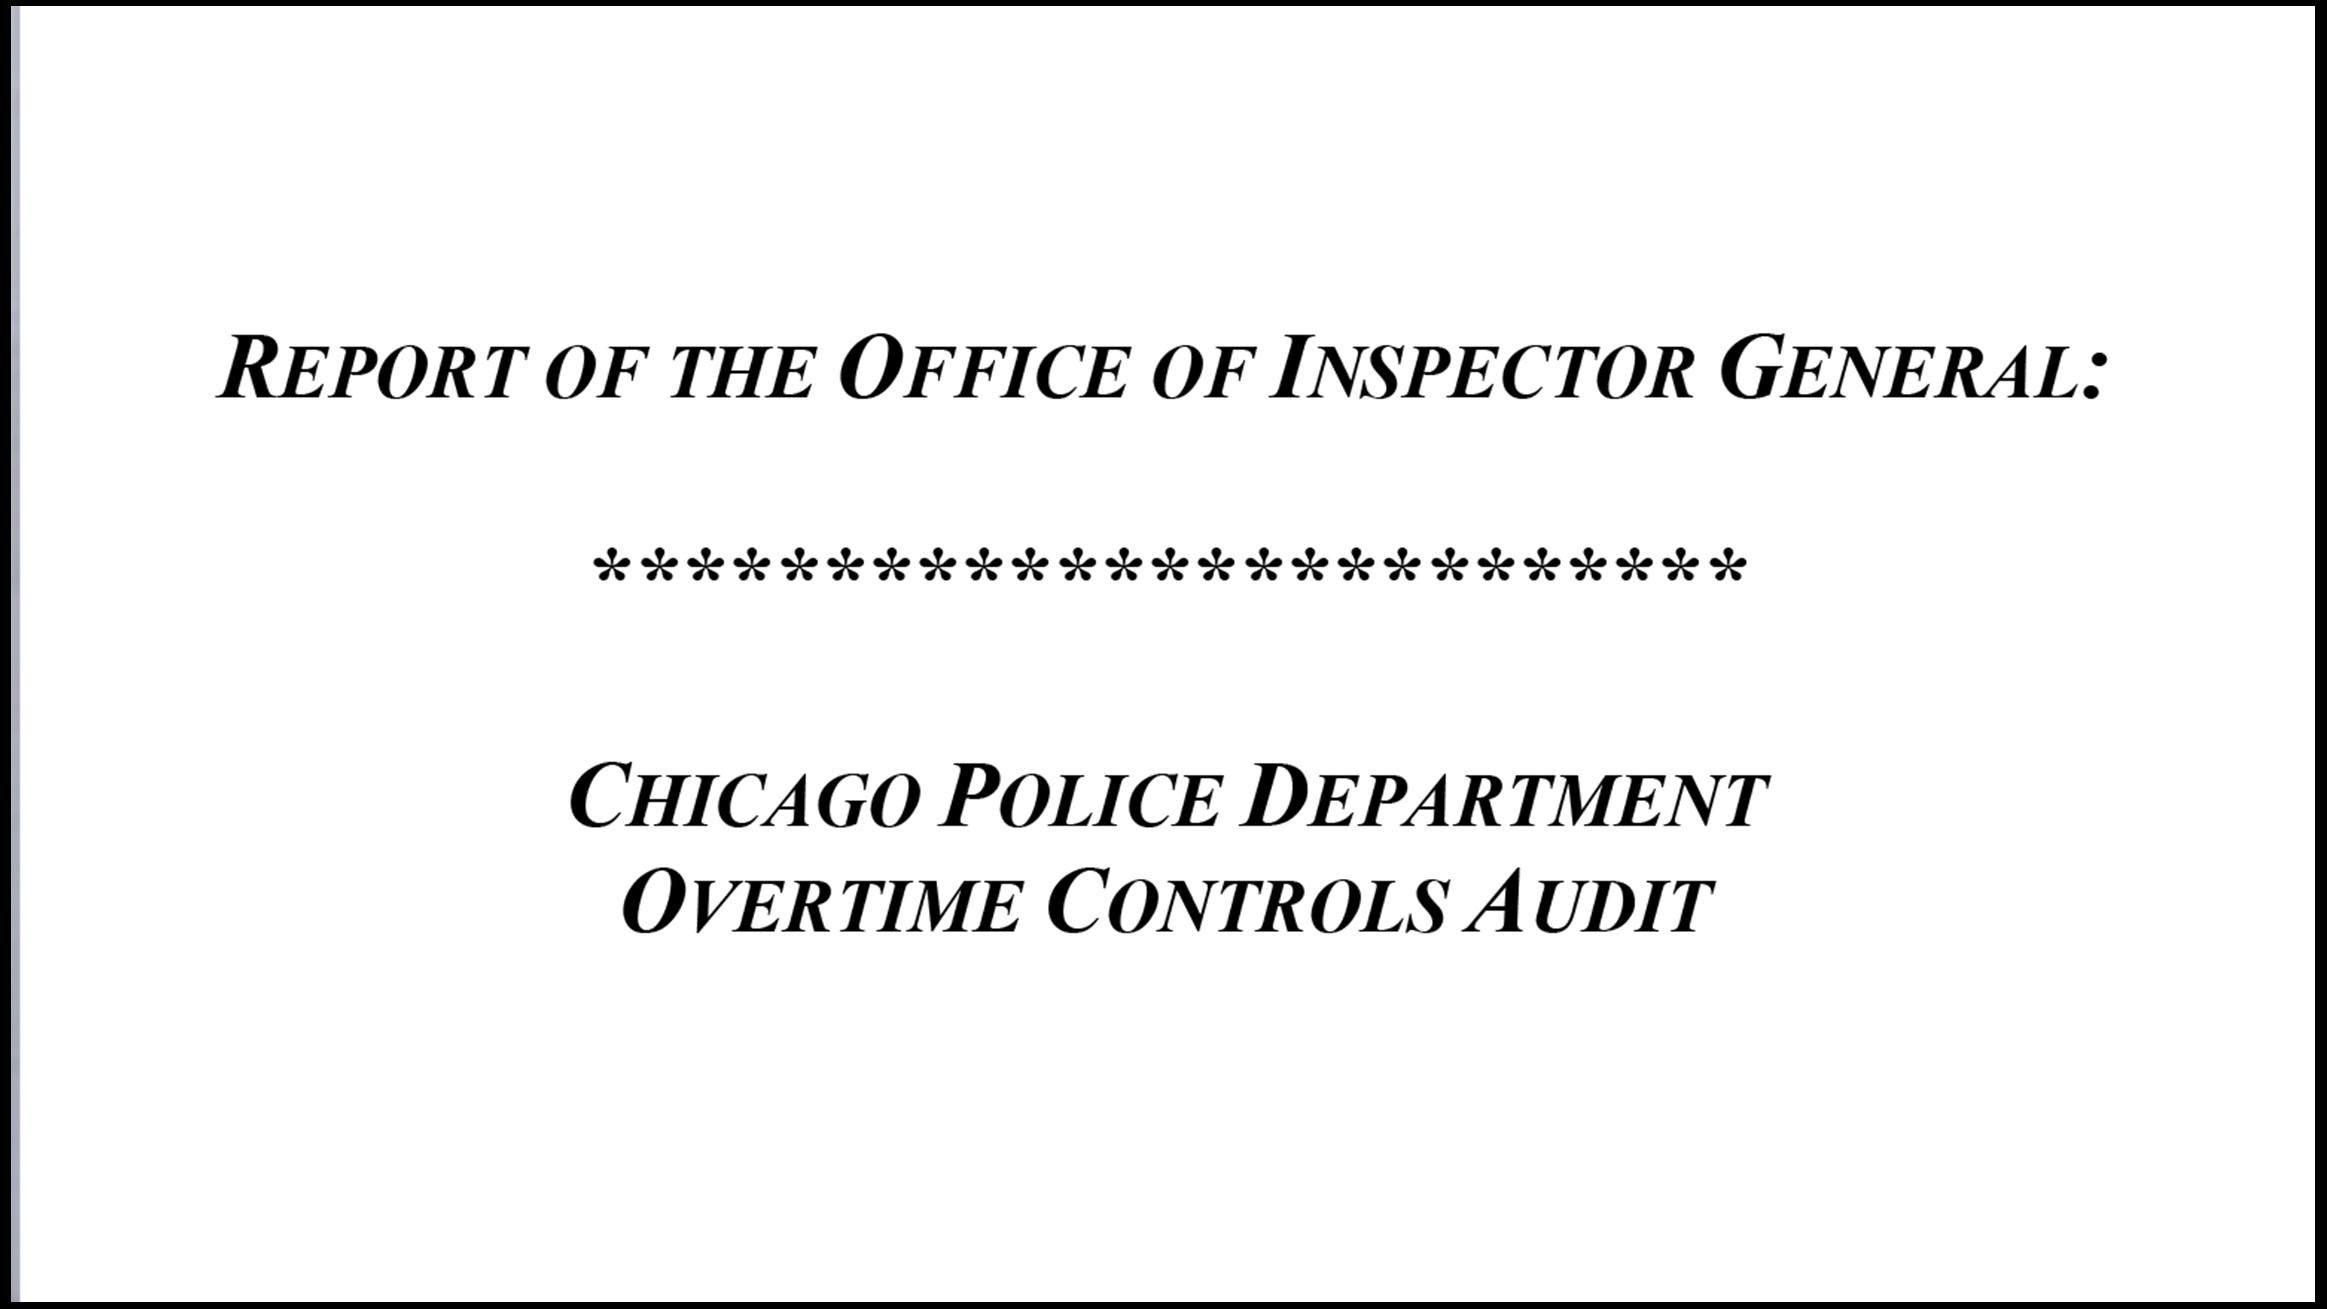 Document: Read the inspector general’s report